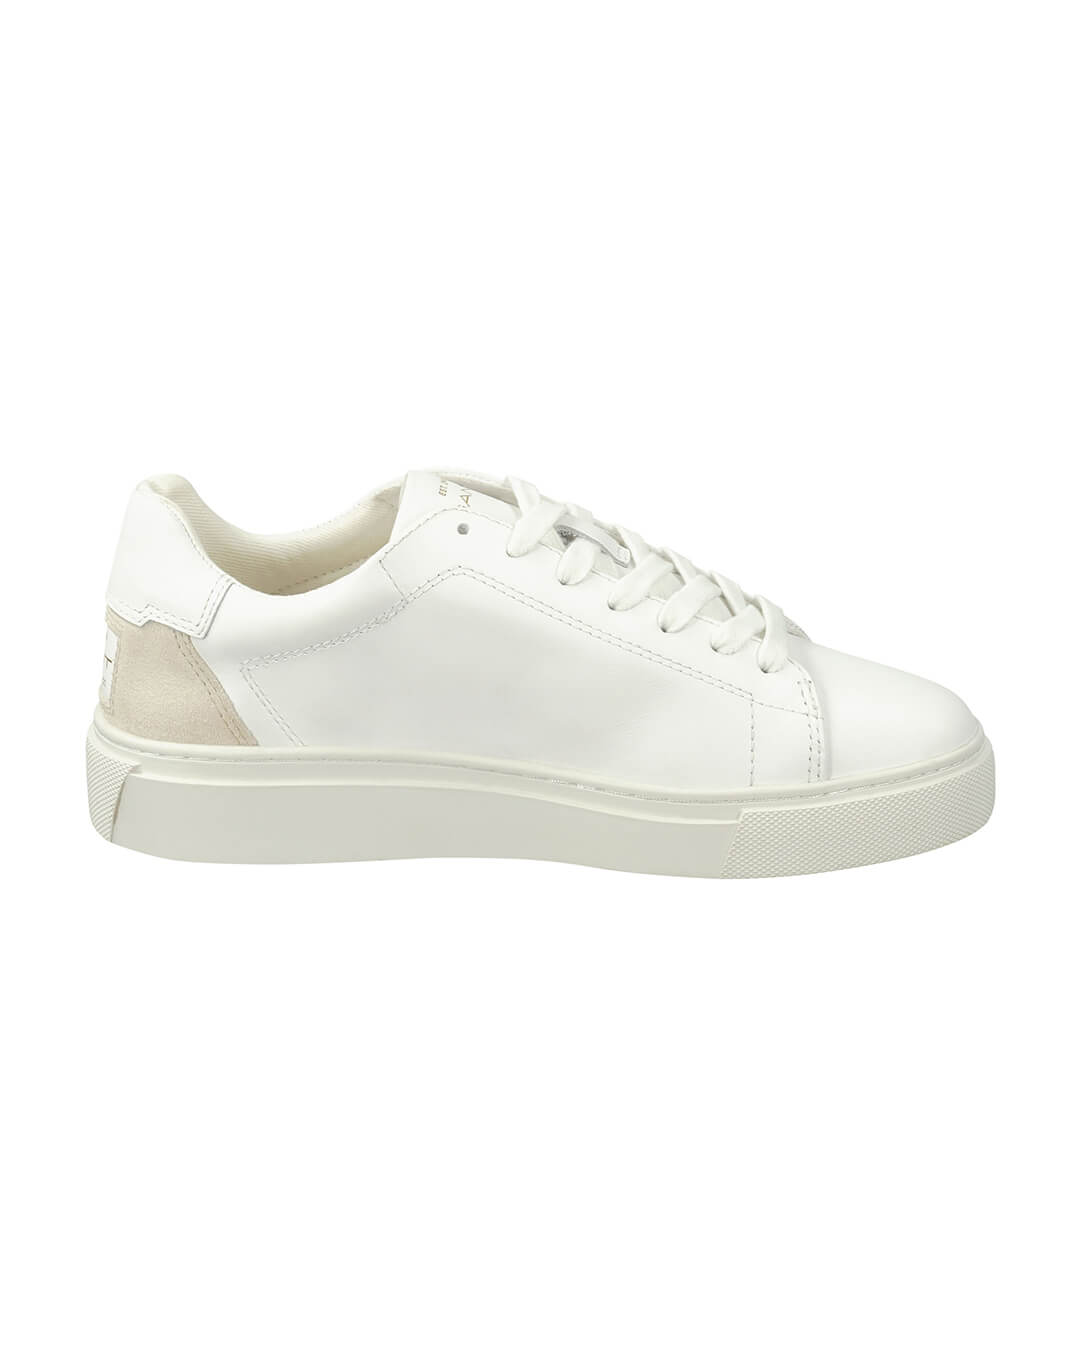 Gant Shoes Gant Off White Julice Sneakers